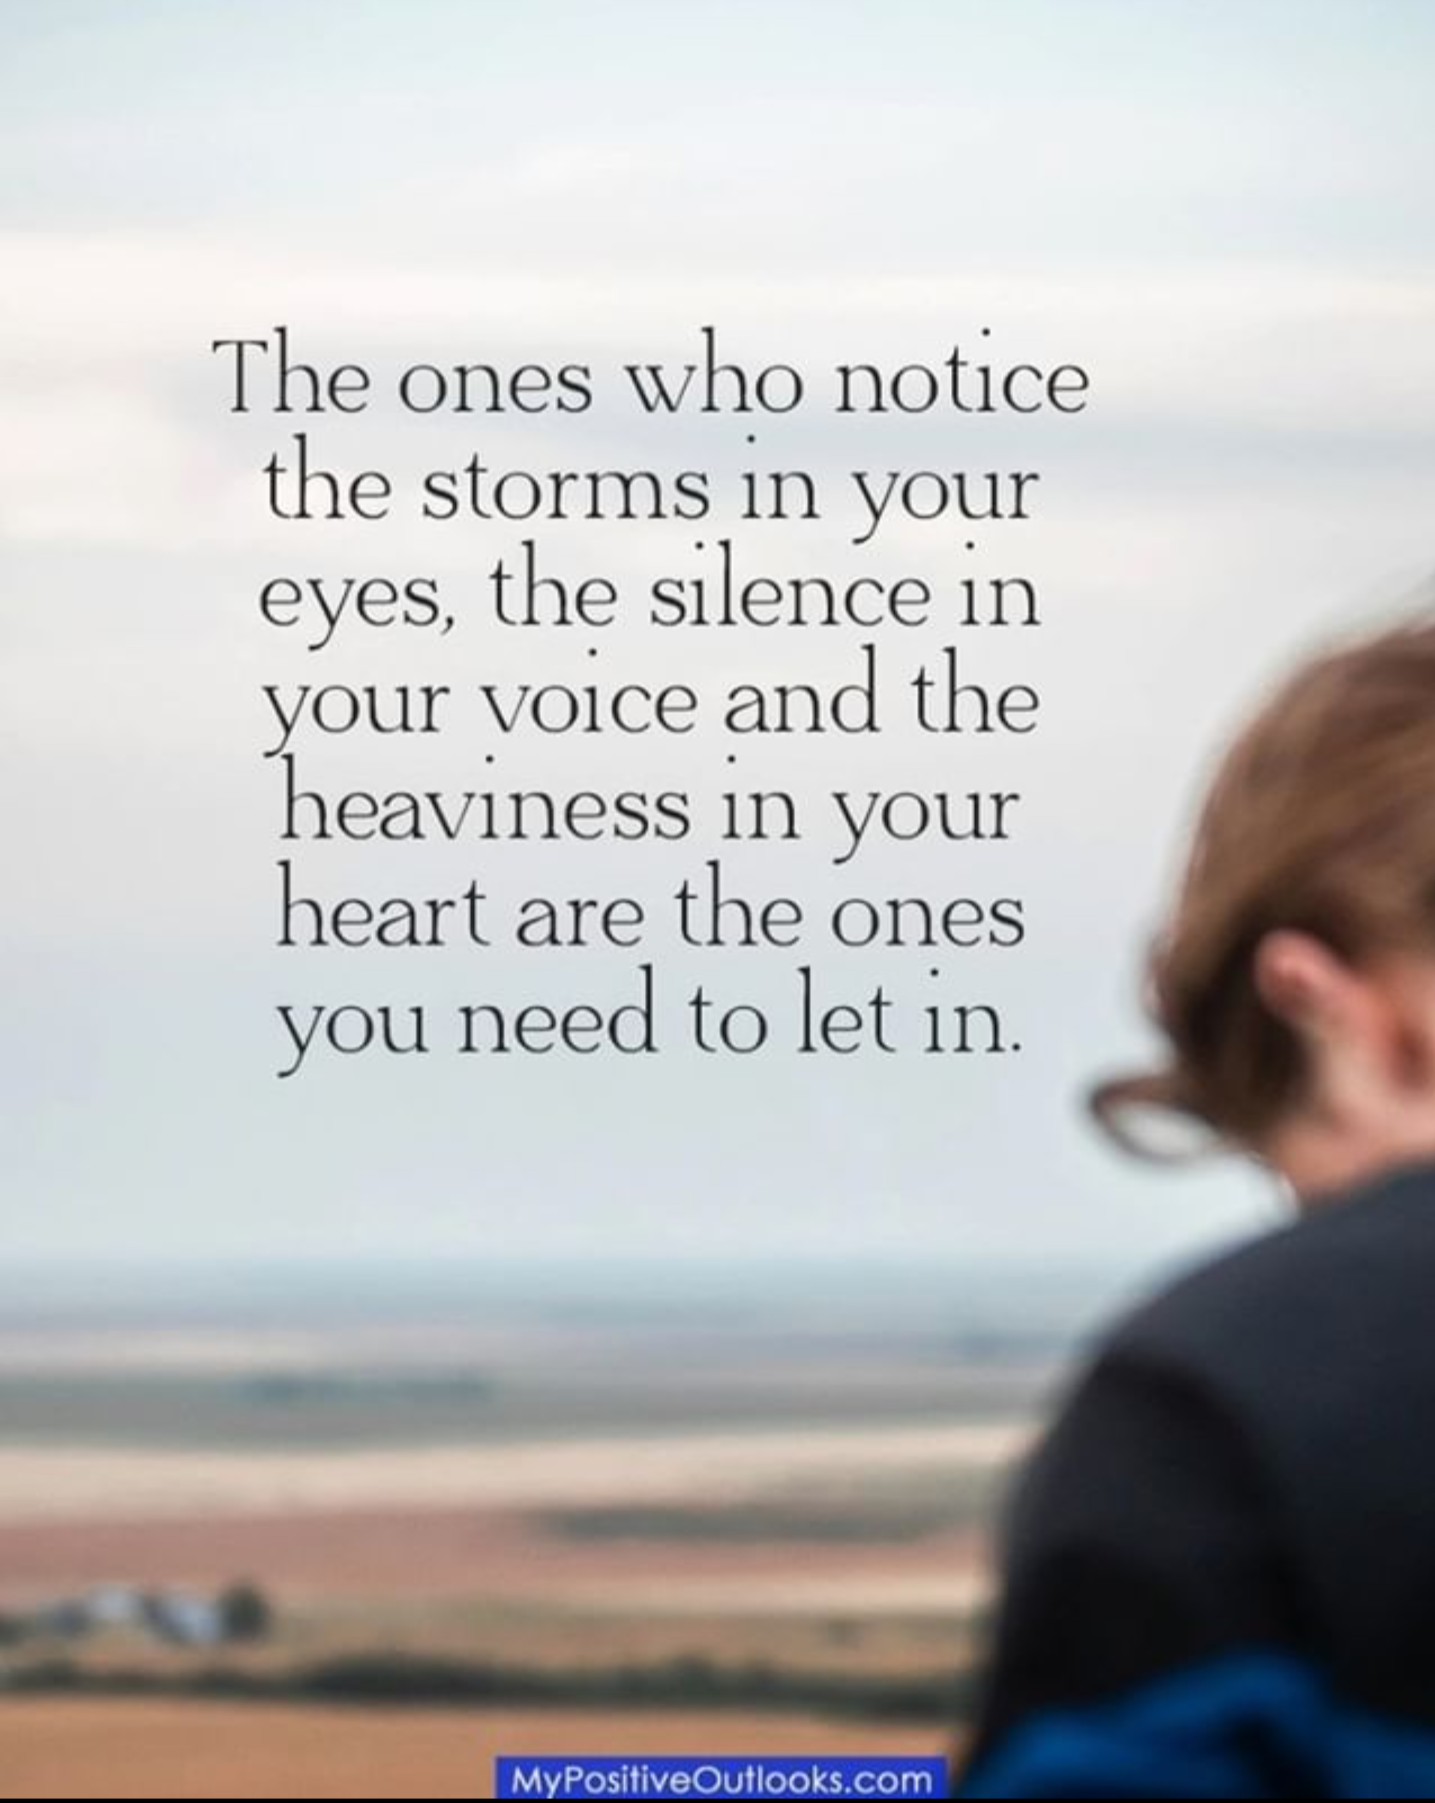 DFW Enterprises, Inc » Blog Archive » The Ones Who Notice The Storms In ...